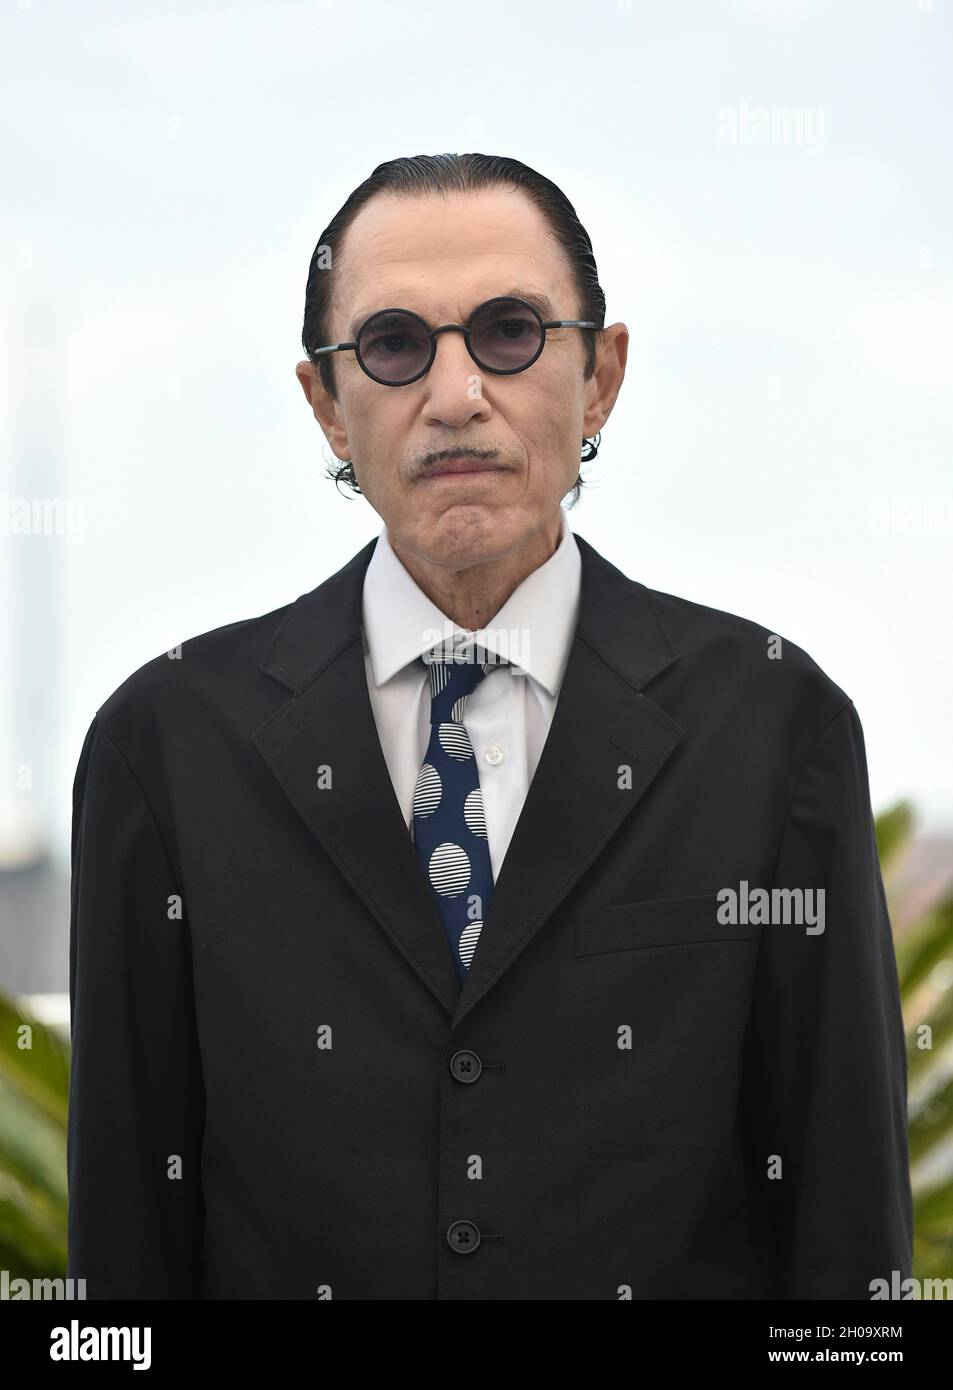 74th edition of the Cannes Film Festival: musician, songwriter and composer Ron Mael posing during the photocall for the film 'Annette” by Leos Carax, Stock Photo